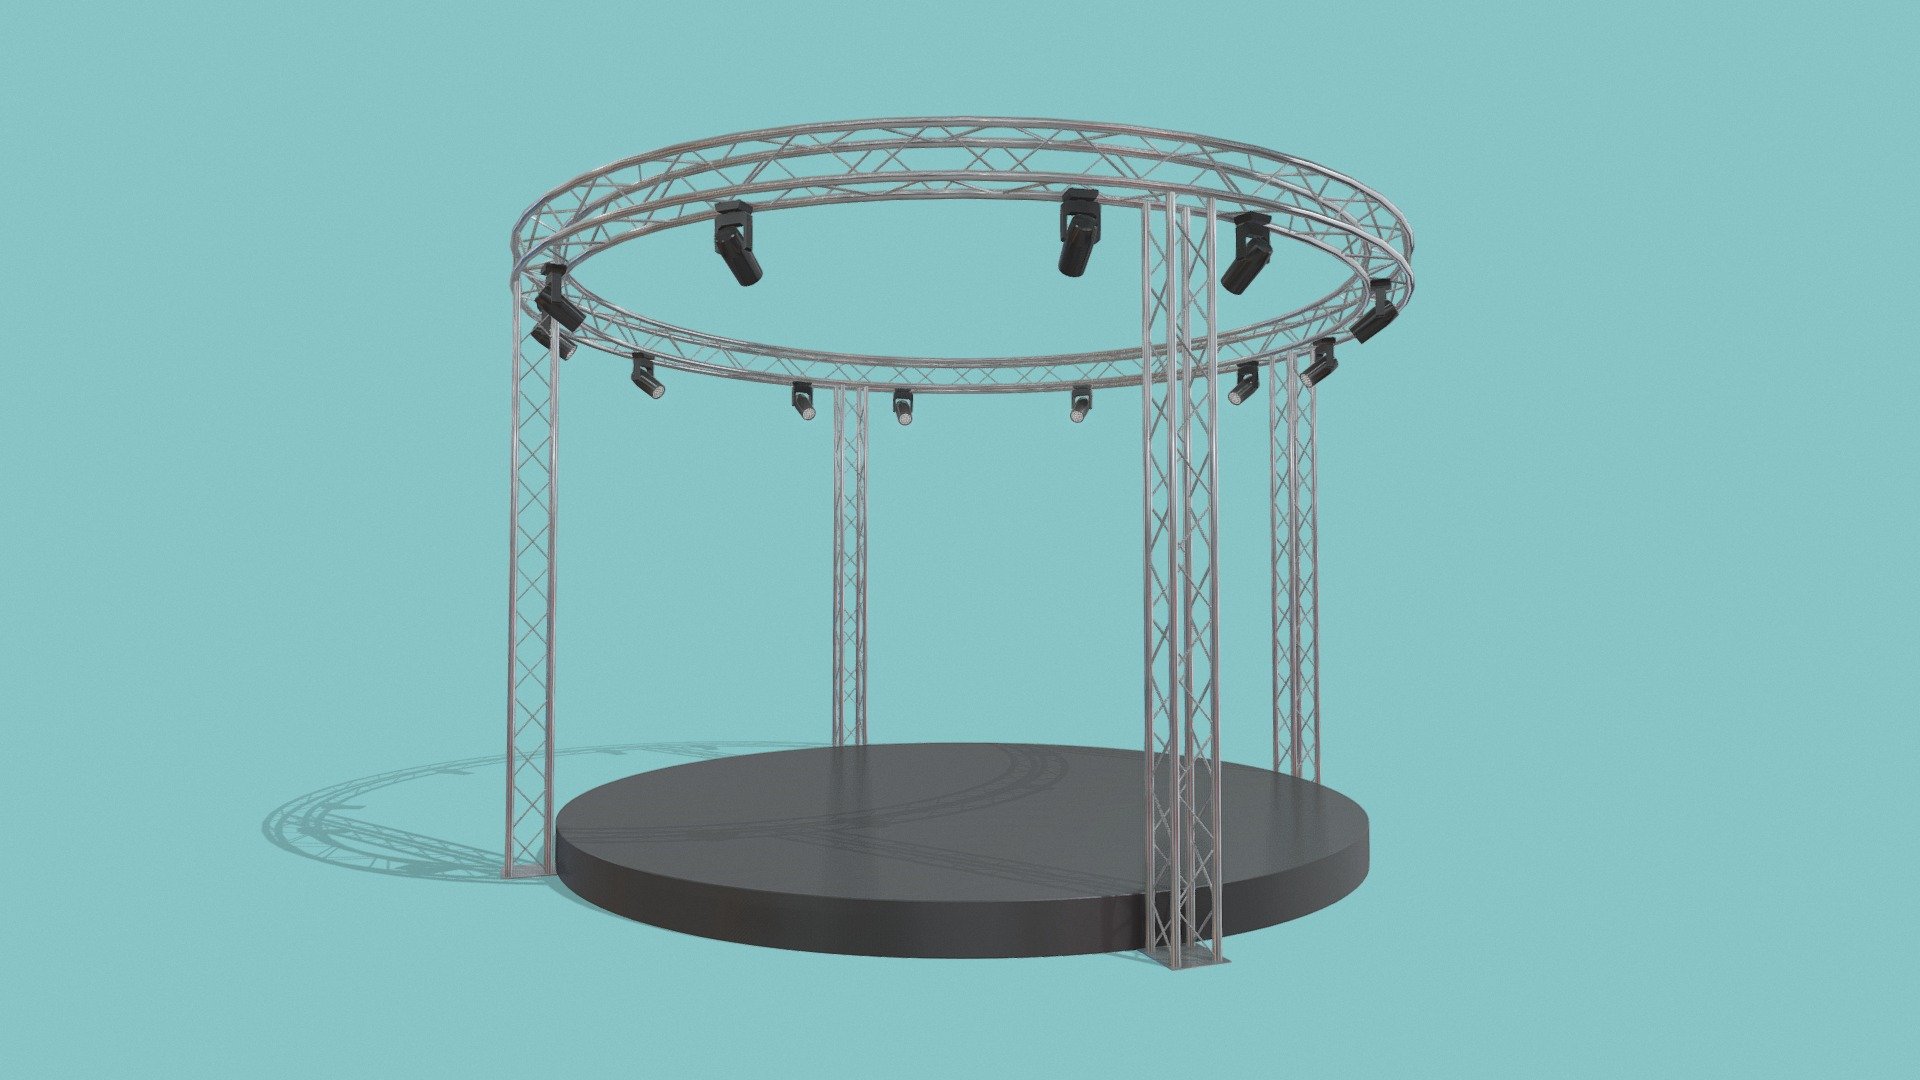 Concert Stage 11

Measurements:




Platform is: Diameter: 6m, Height: 0.3m

Inner height (from the top of the platform to the lower part of the circular truss): 3.7m

Total height from bottom to top: 4.35m

Total diameter (including the circular truss): 6.7m

IMPORTANT NOTES:




This model does not have textures or materials, but it has separate generic materials, it is also separated into parts, so you can easily assign your own materials.

If you have any doubts or questions about this model, you can send us a message 3d model